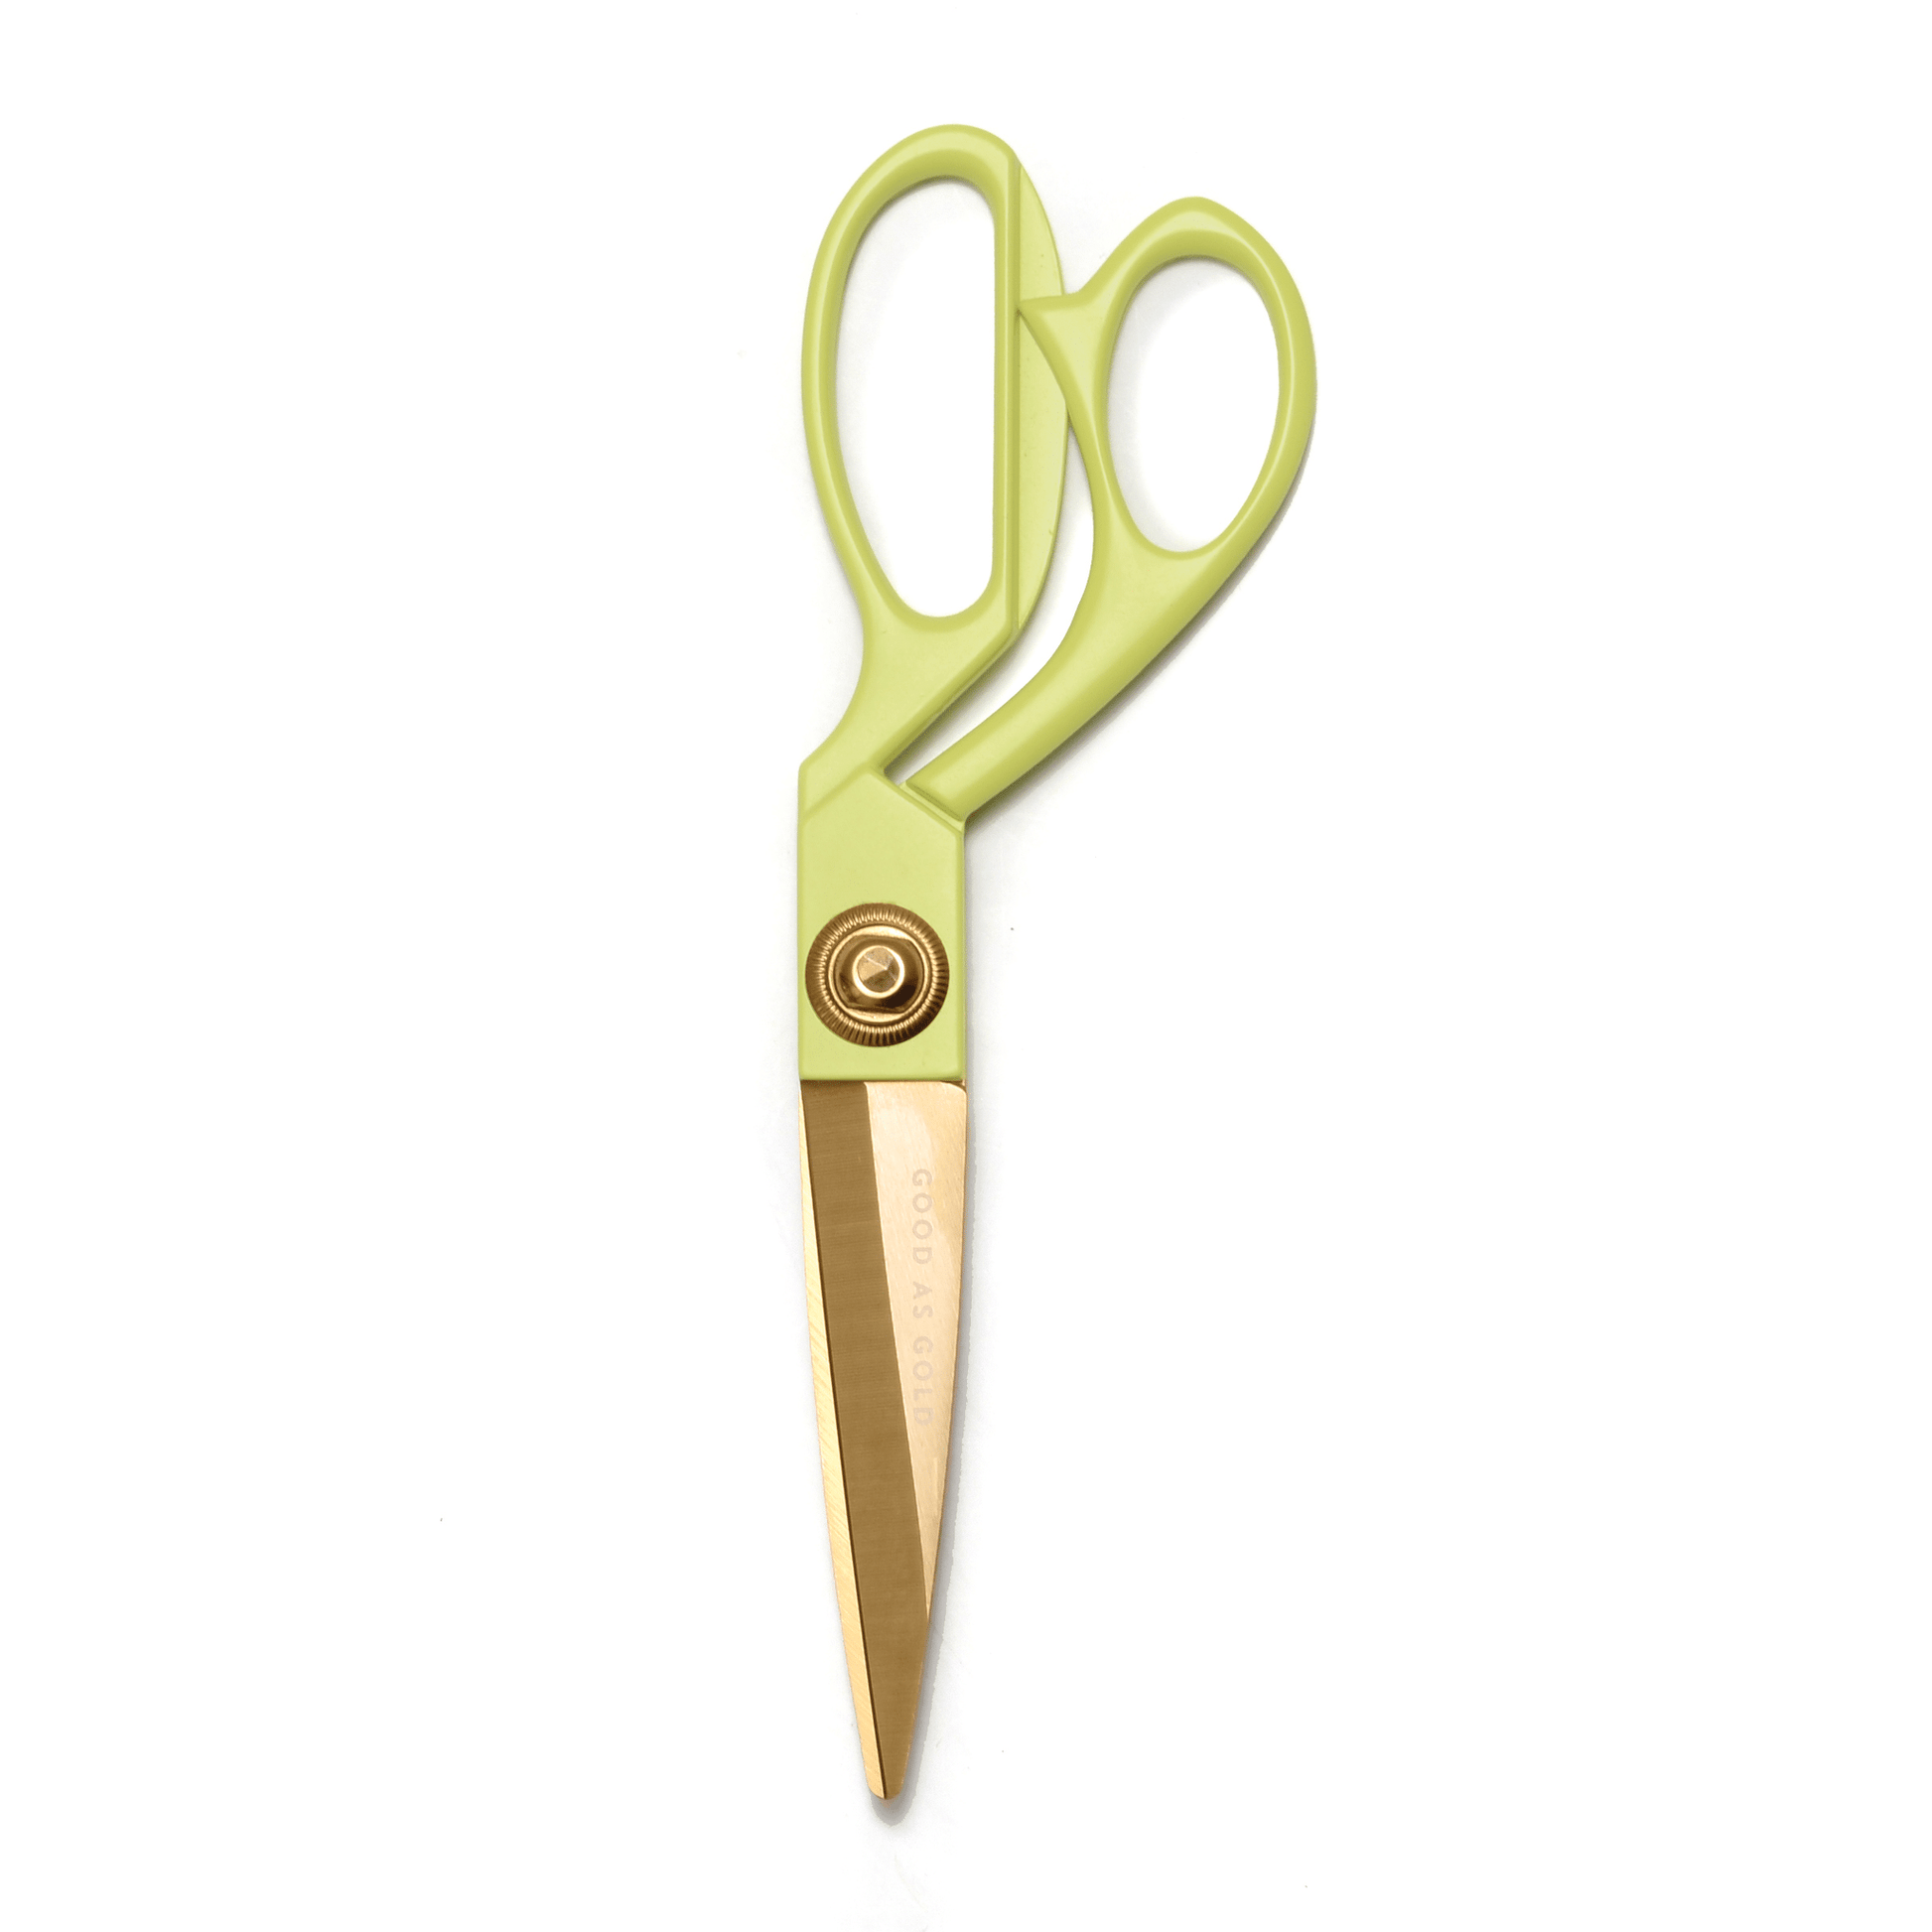 The Good Scissors - Matcha on a white background. 